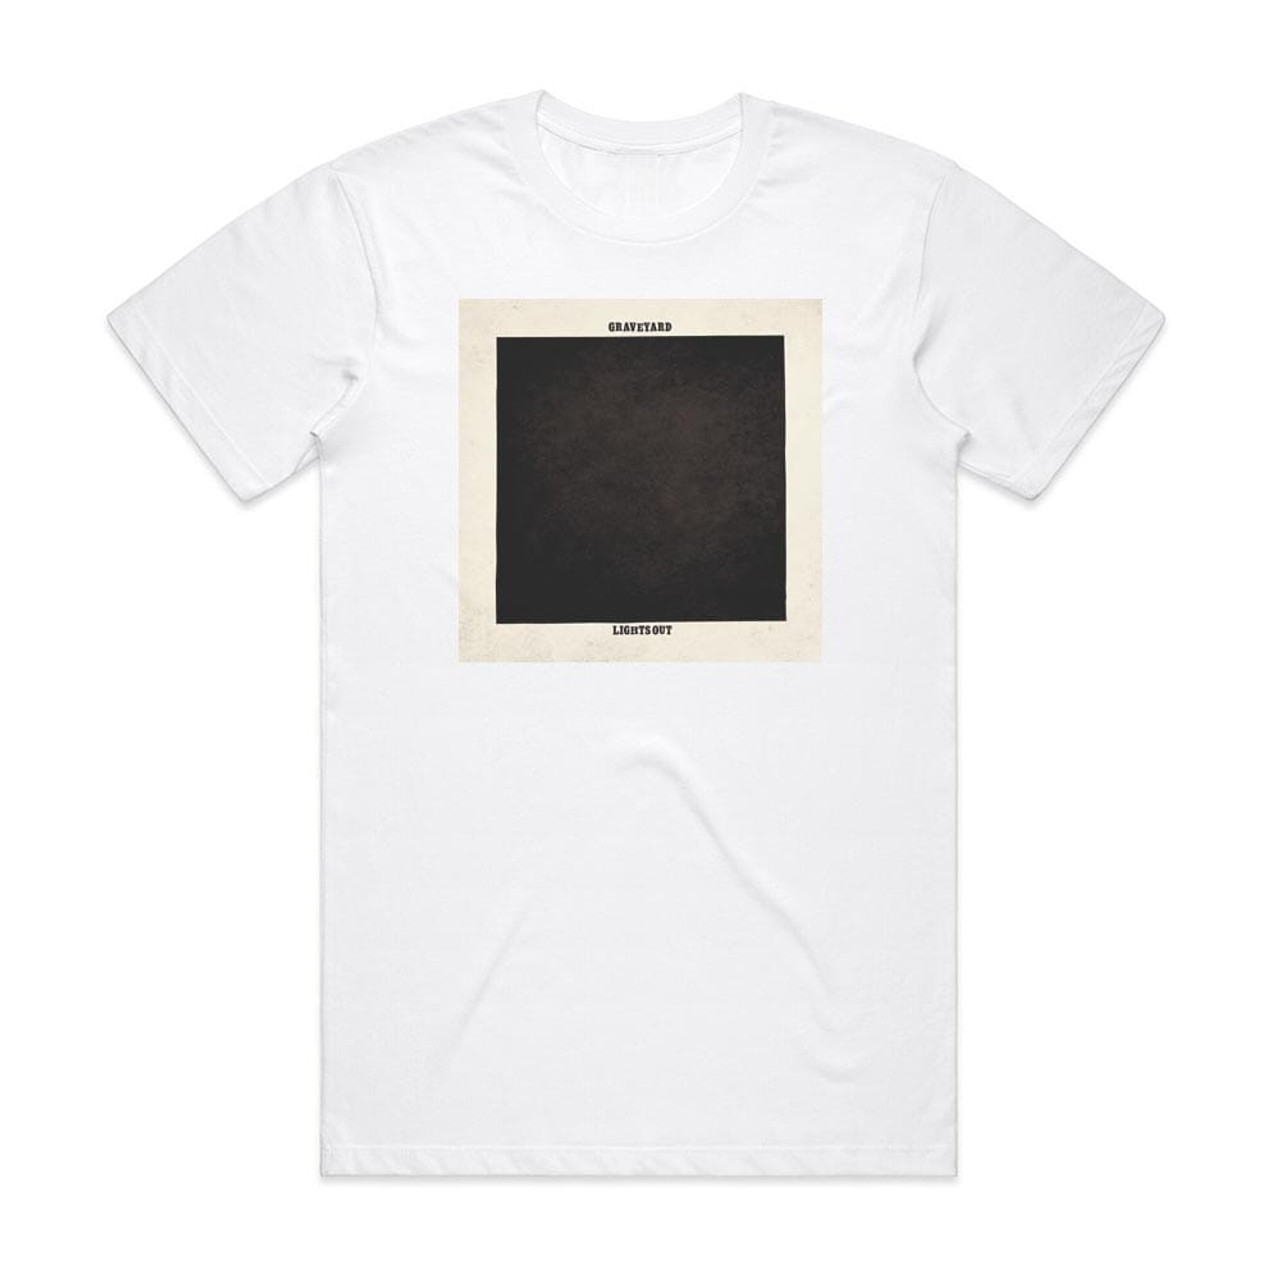 Graveyard Lights Out Album Cover T-Shirt White